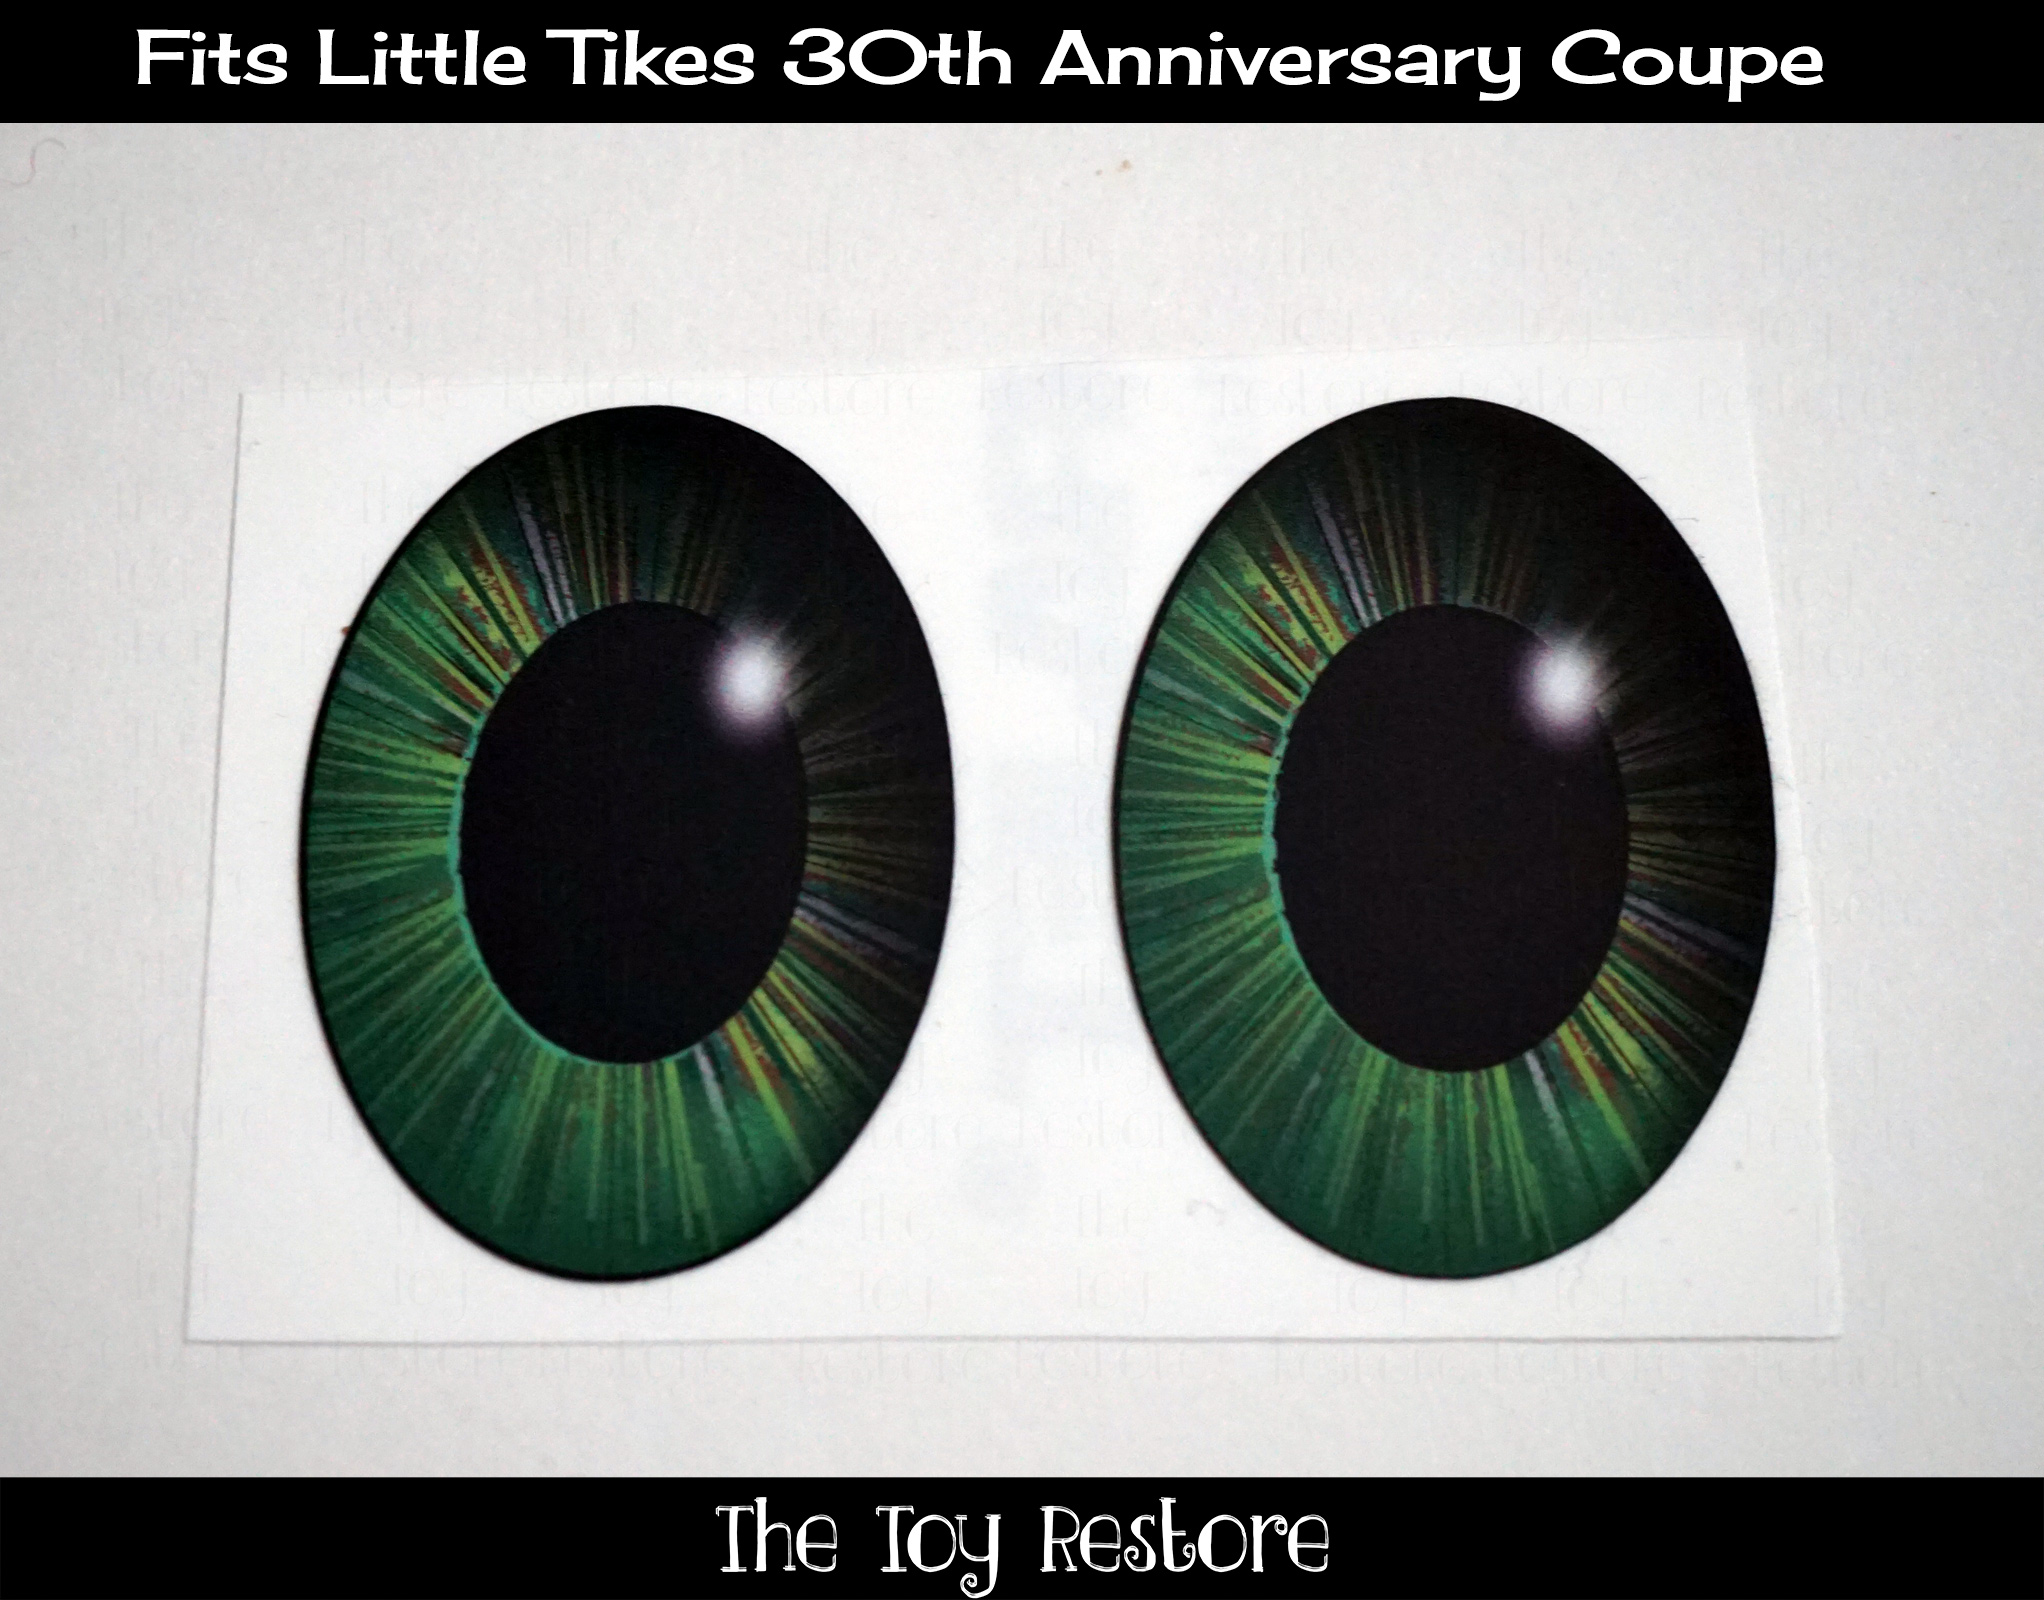 Customize Childs Little Tikes 30th Anniversary Coupe with Eye Color green